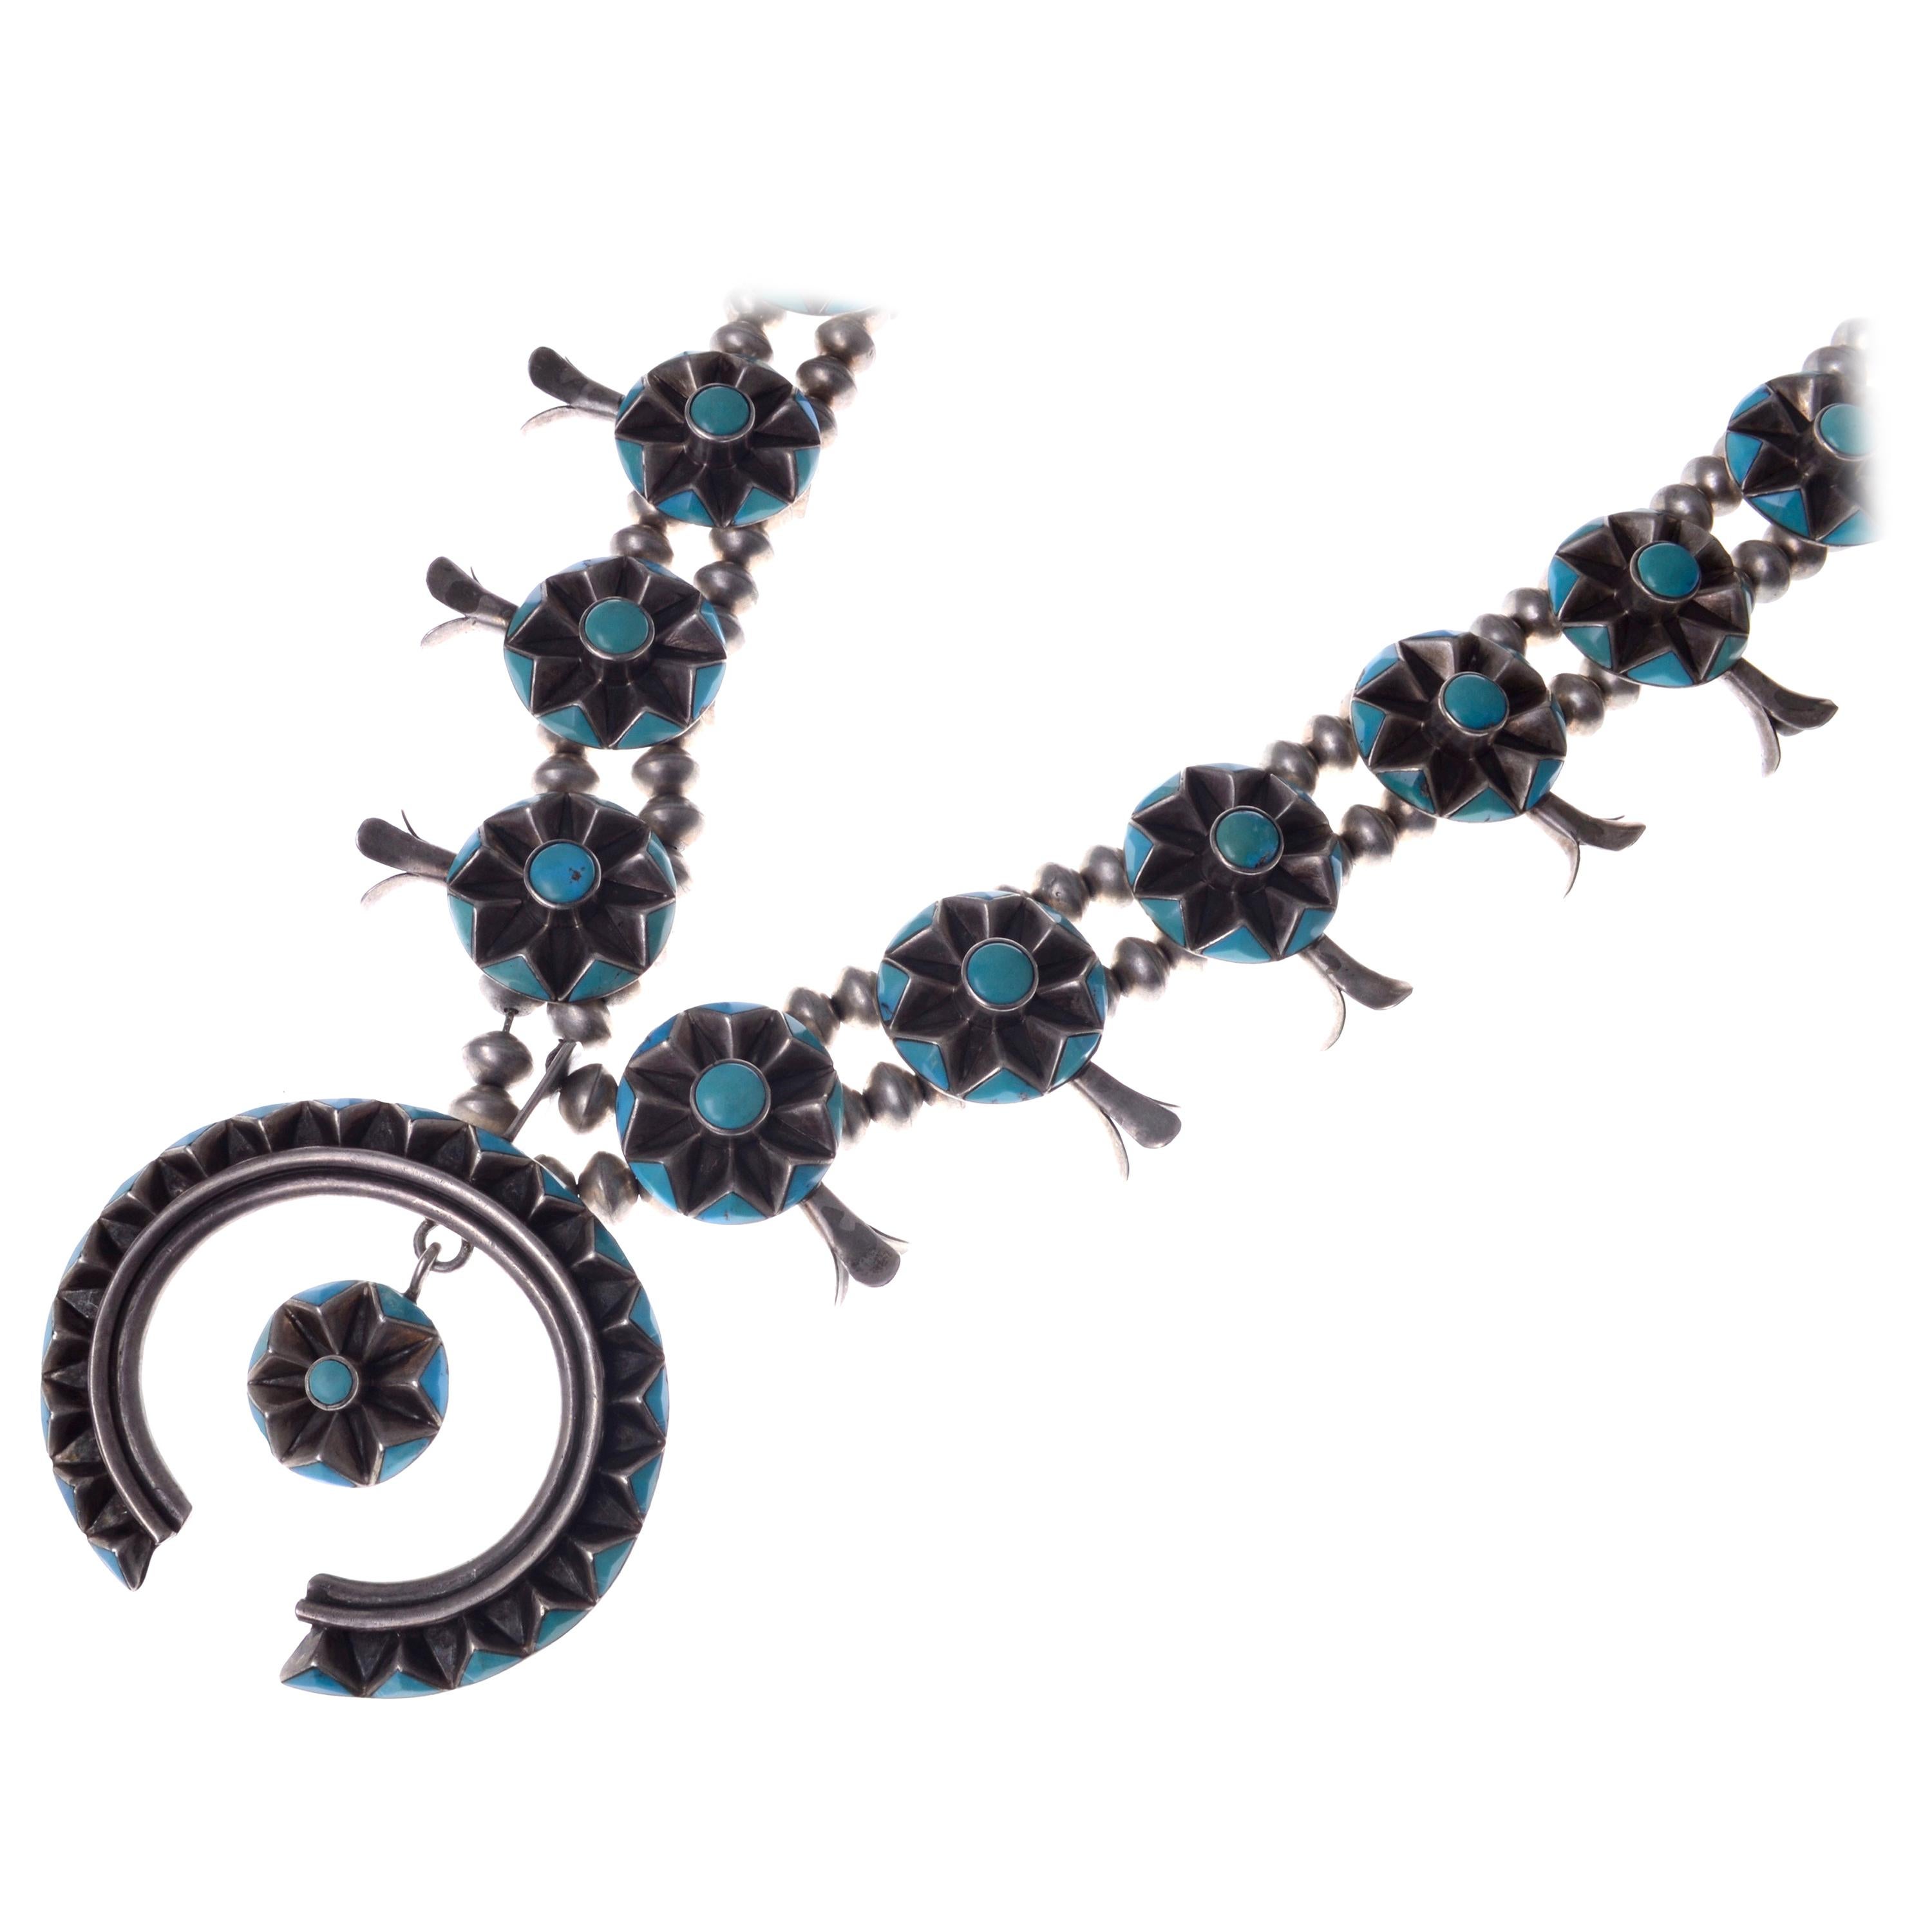 Kee Joe Benally Turquoise and Sterling Squash Blossom Necklace, c. 1960